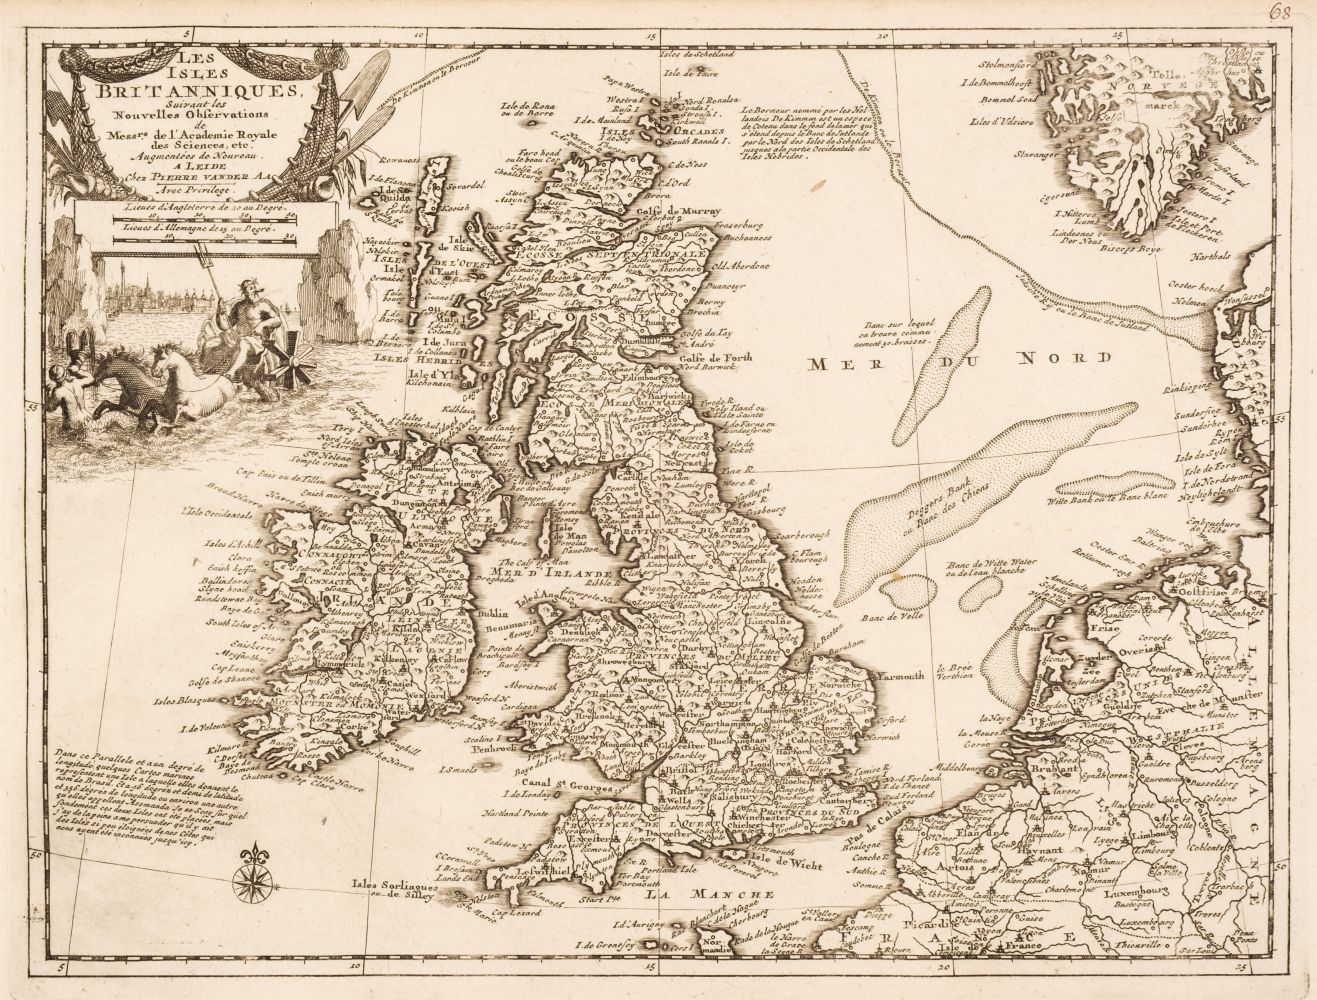 British Isles. A collection of 18 maps, 17th - 19th century